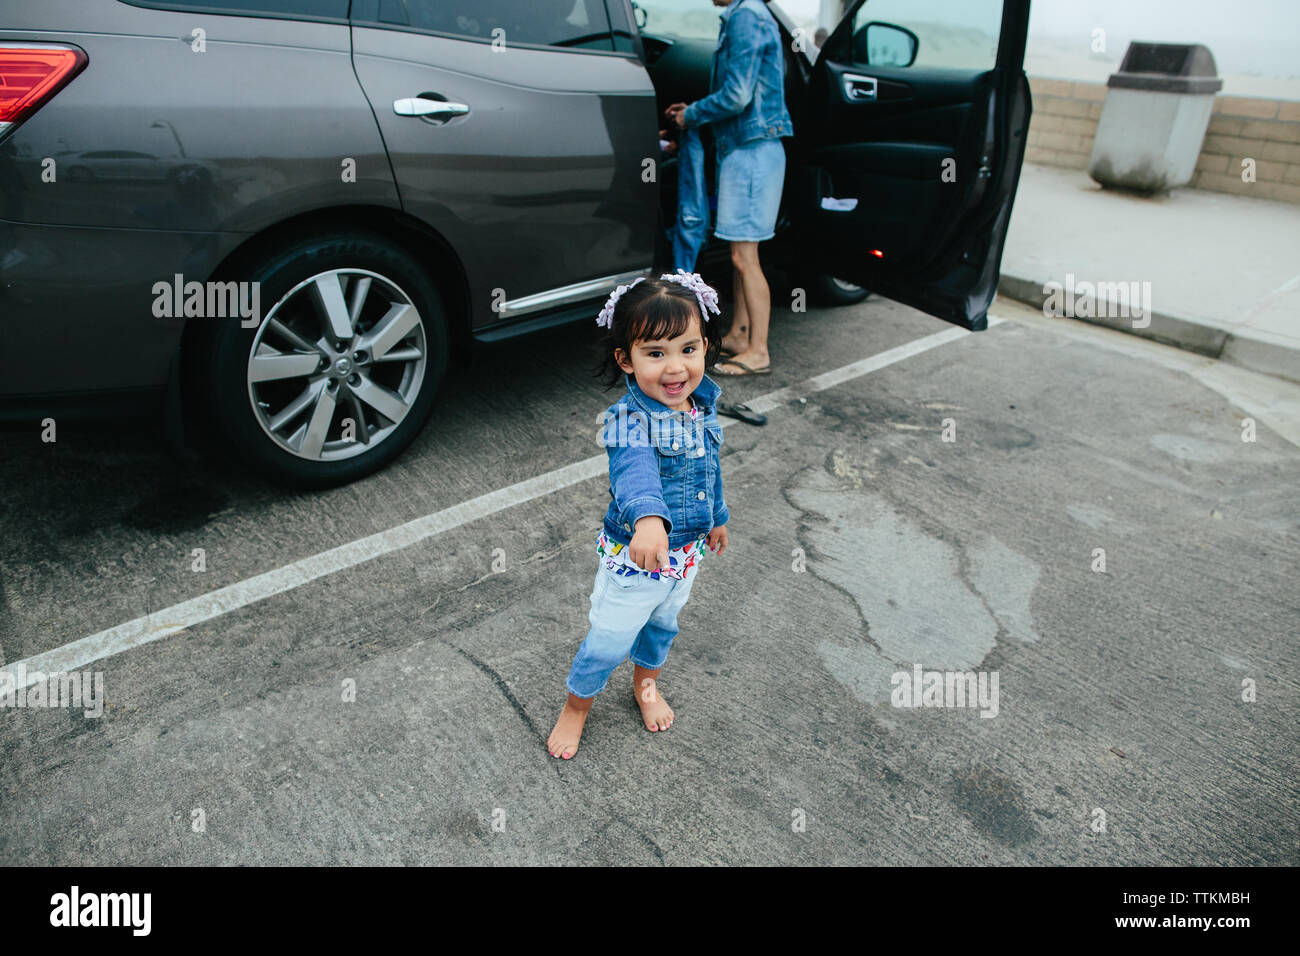 Toddler Girl Pointing And Looking At Camera In Parking Lot Stock Photo